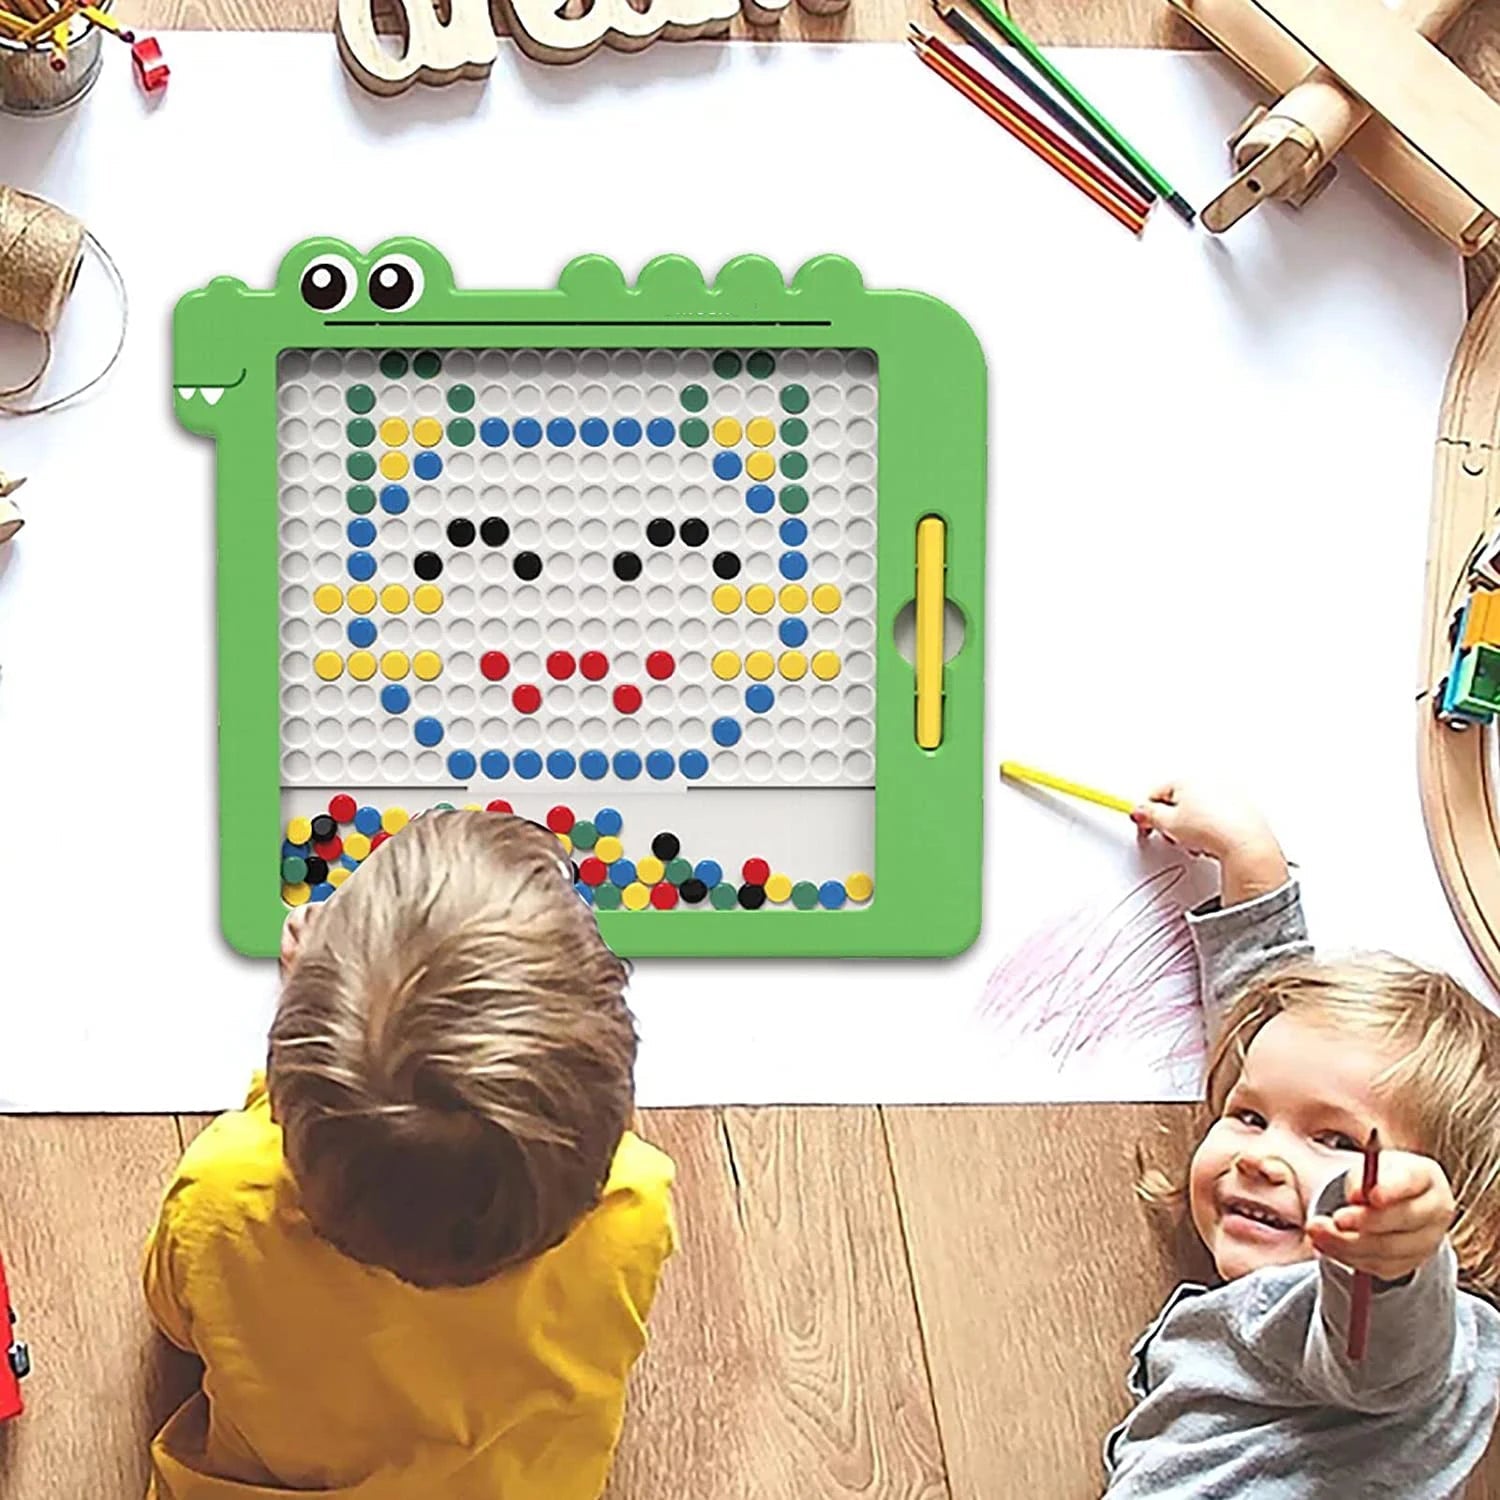 Dino Drawing Board: An Early Learning Toy for Kids - ToylandEU